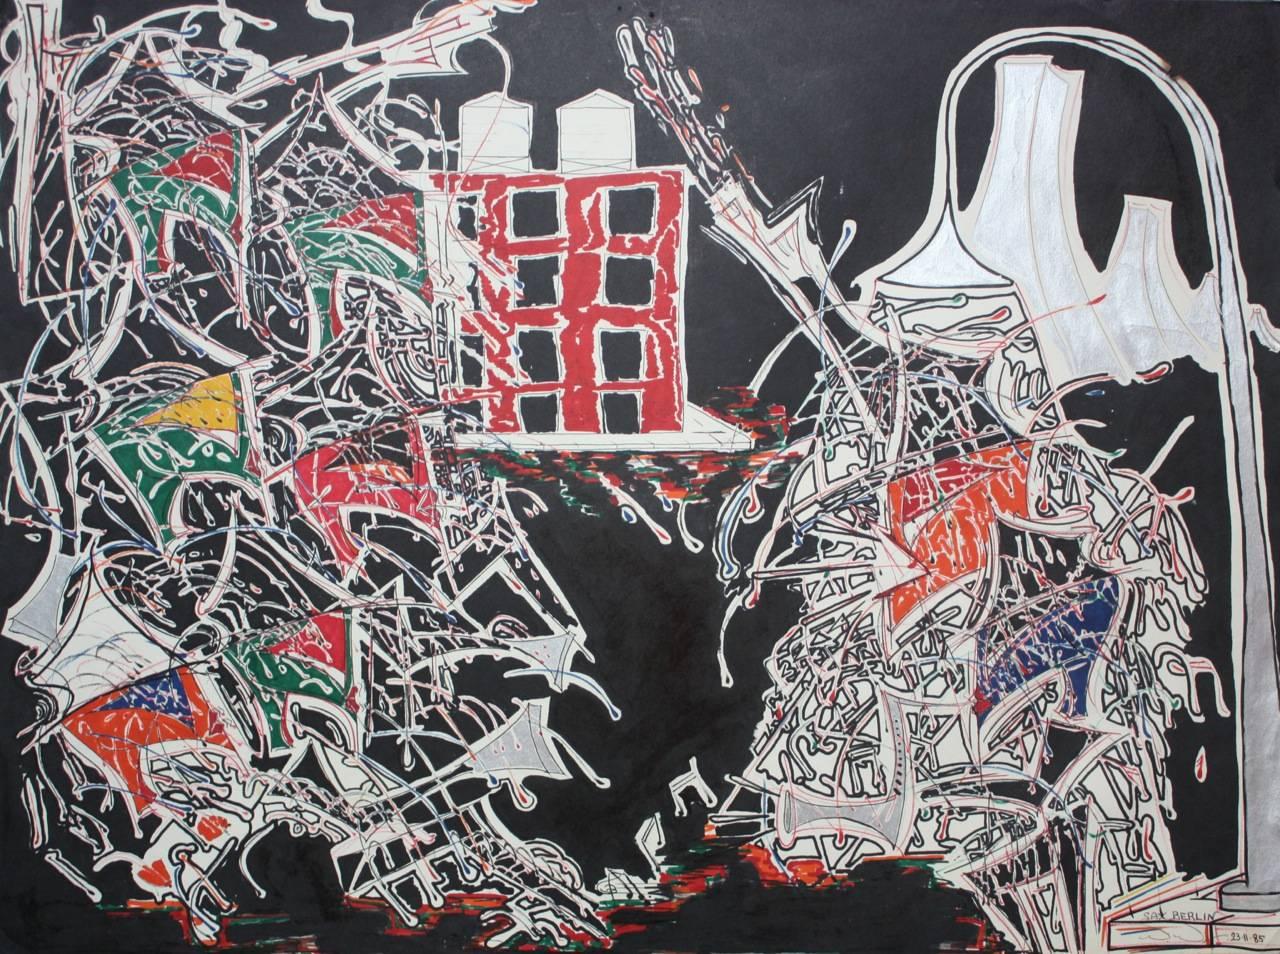 Sax Berlin Abstract Painting - Neo Expressionism: On The Corner East Village